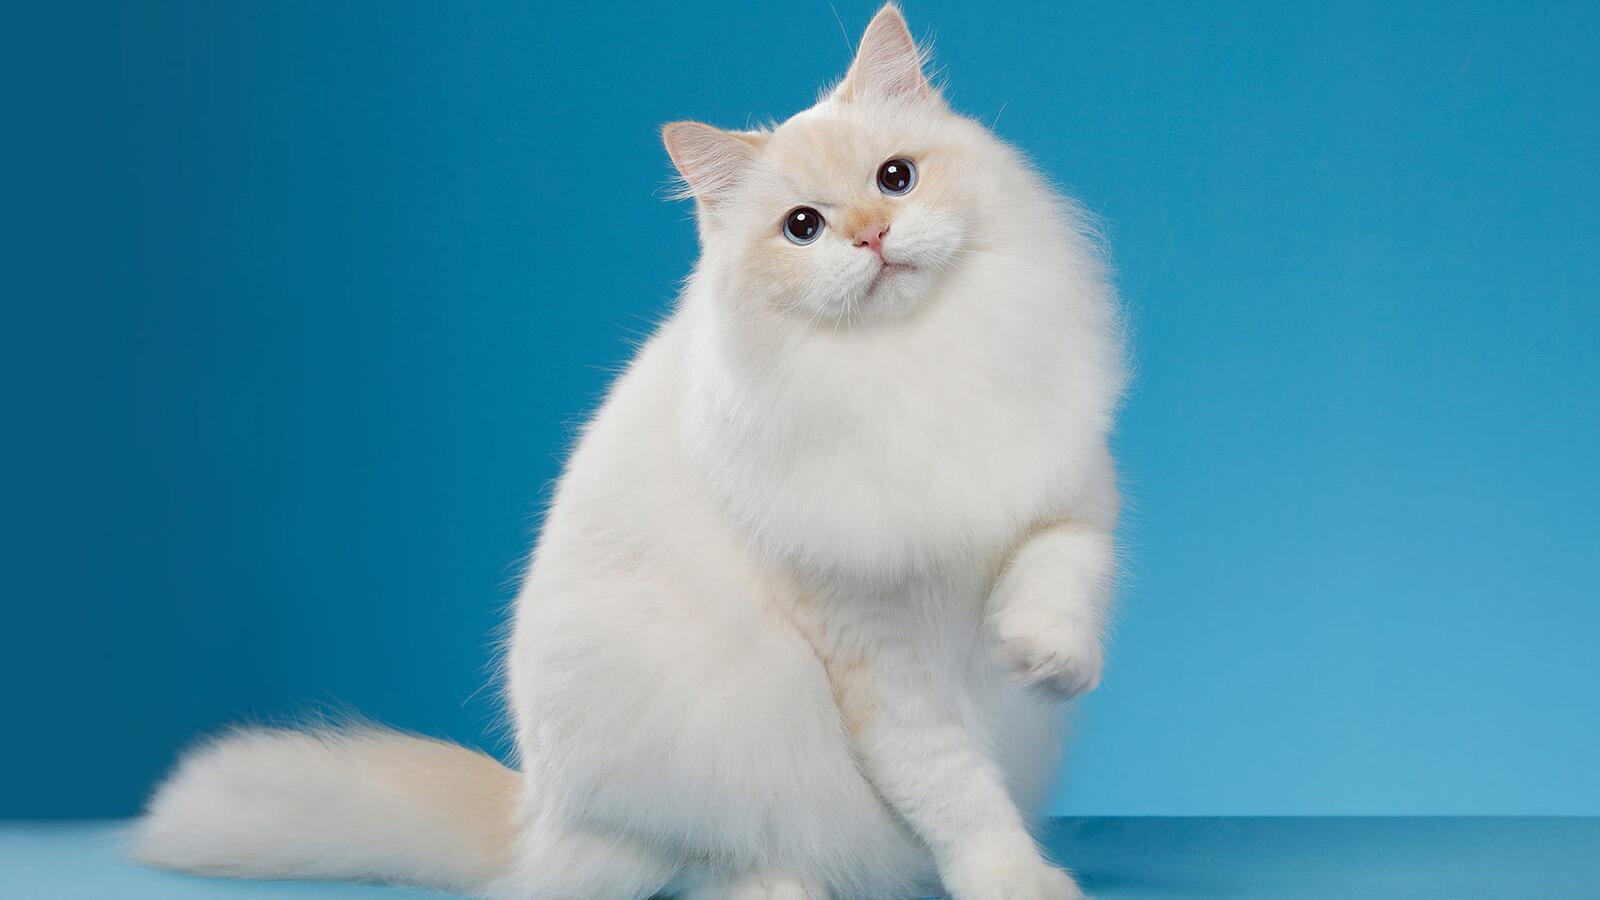 Wallpapers cute posing fluffy white cat on the desktop